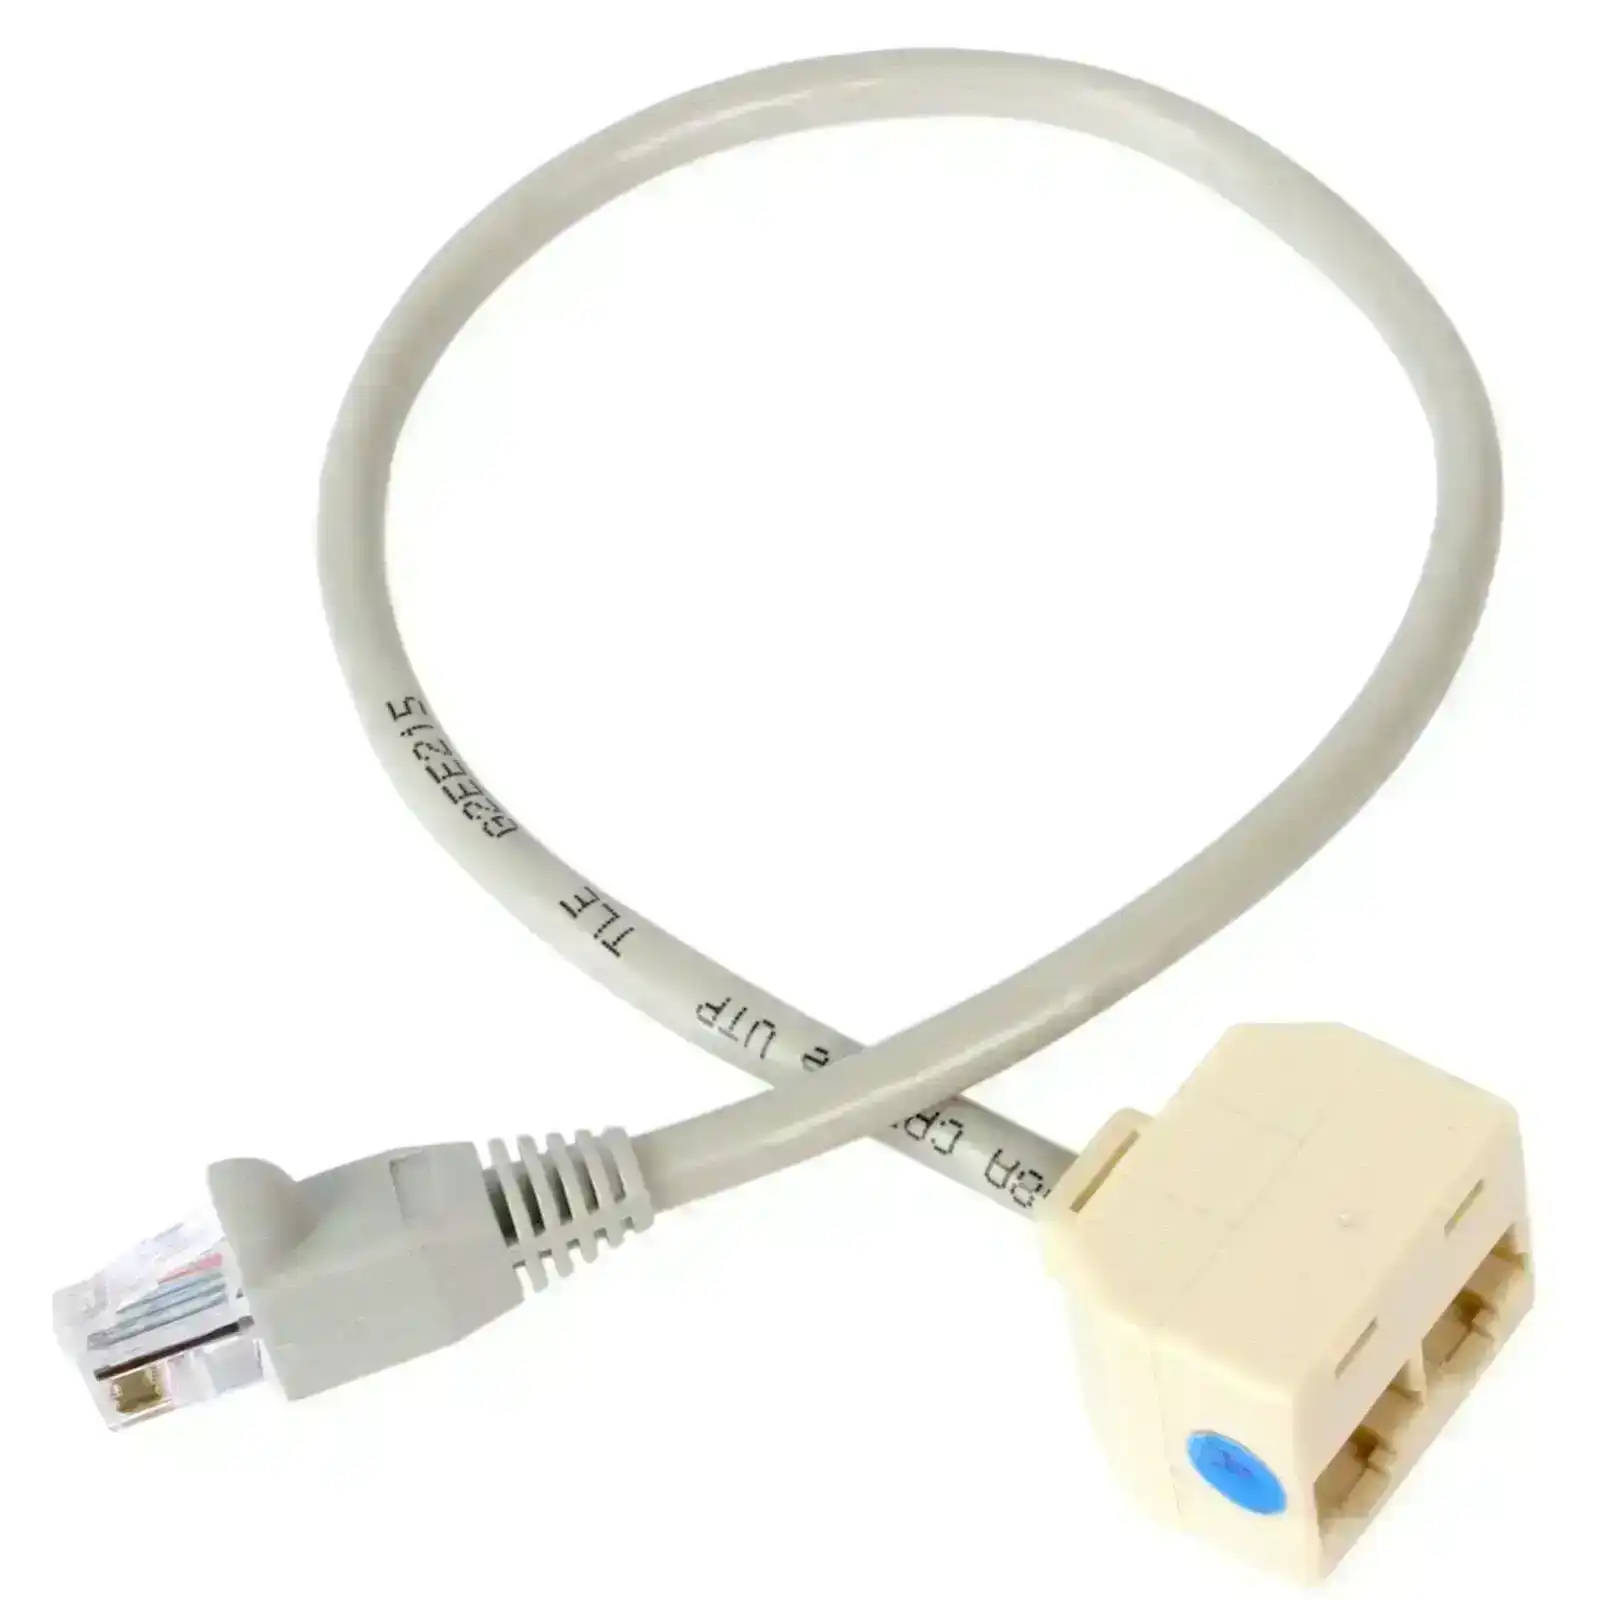 Star Tech 2-to-1 RJ45 Splitter Cable Adapter Female To Male PC/Servers/Network